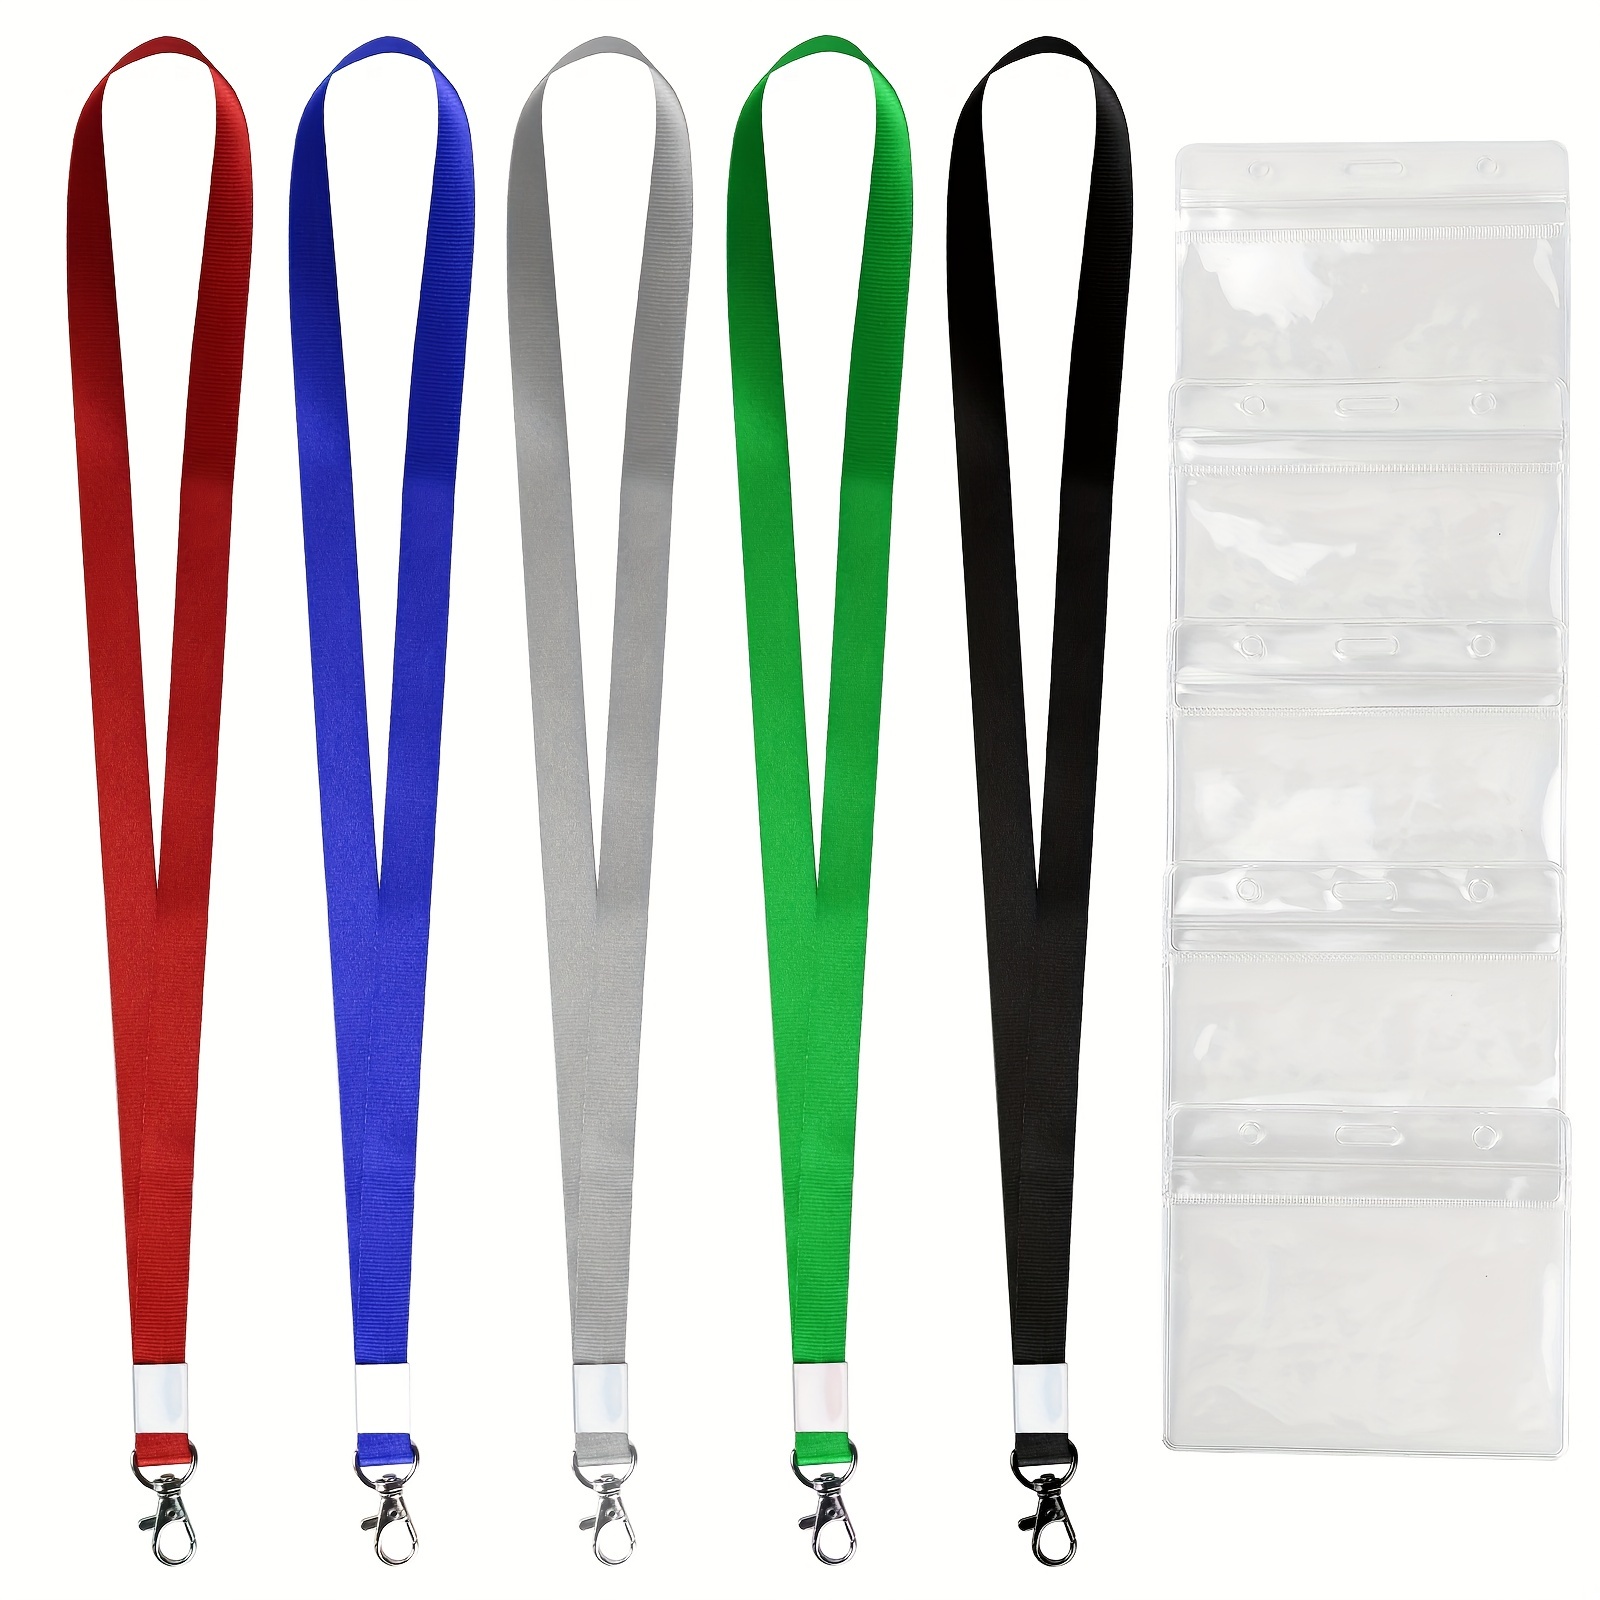 5 Pcs Lanyards With Card Holder For ID Badges, Neck Lanyard Strap Key  Lanyard Bulk Lanyards For Work Badges ID Cards Business Cards Key Rings (5  Color